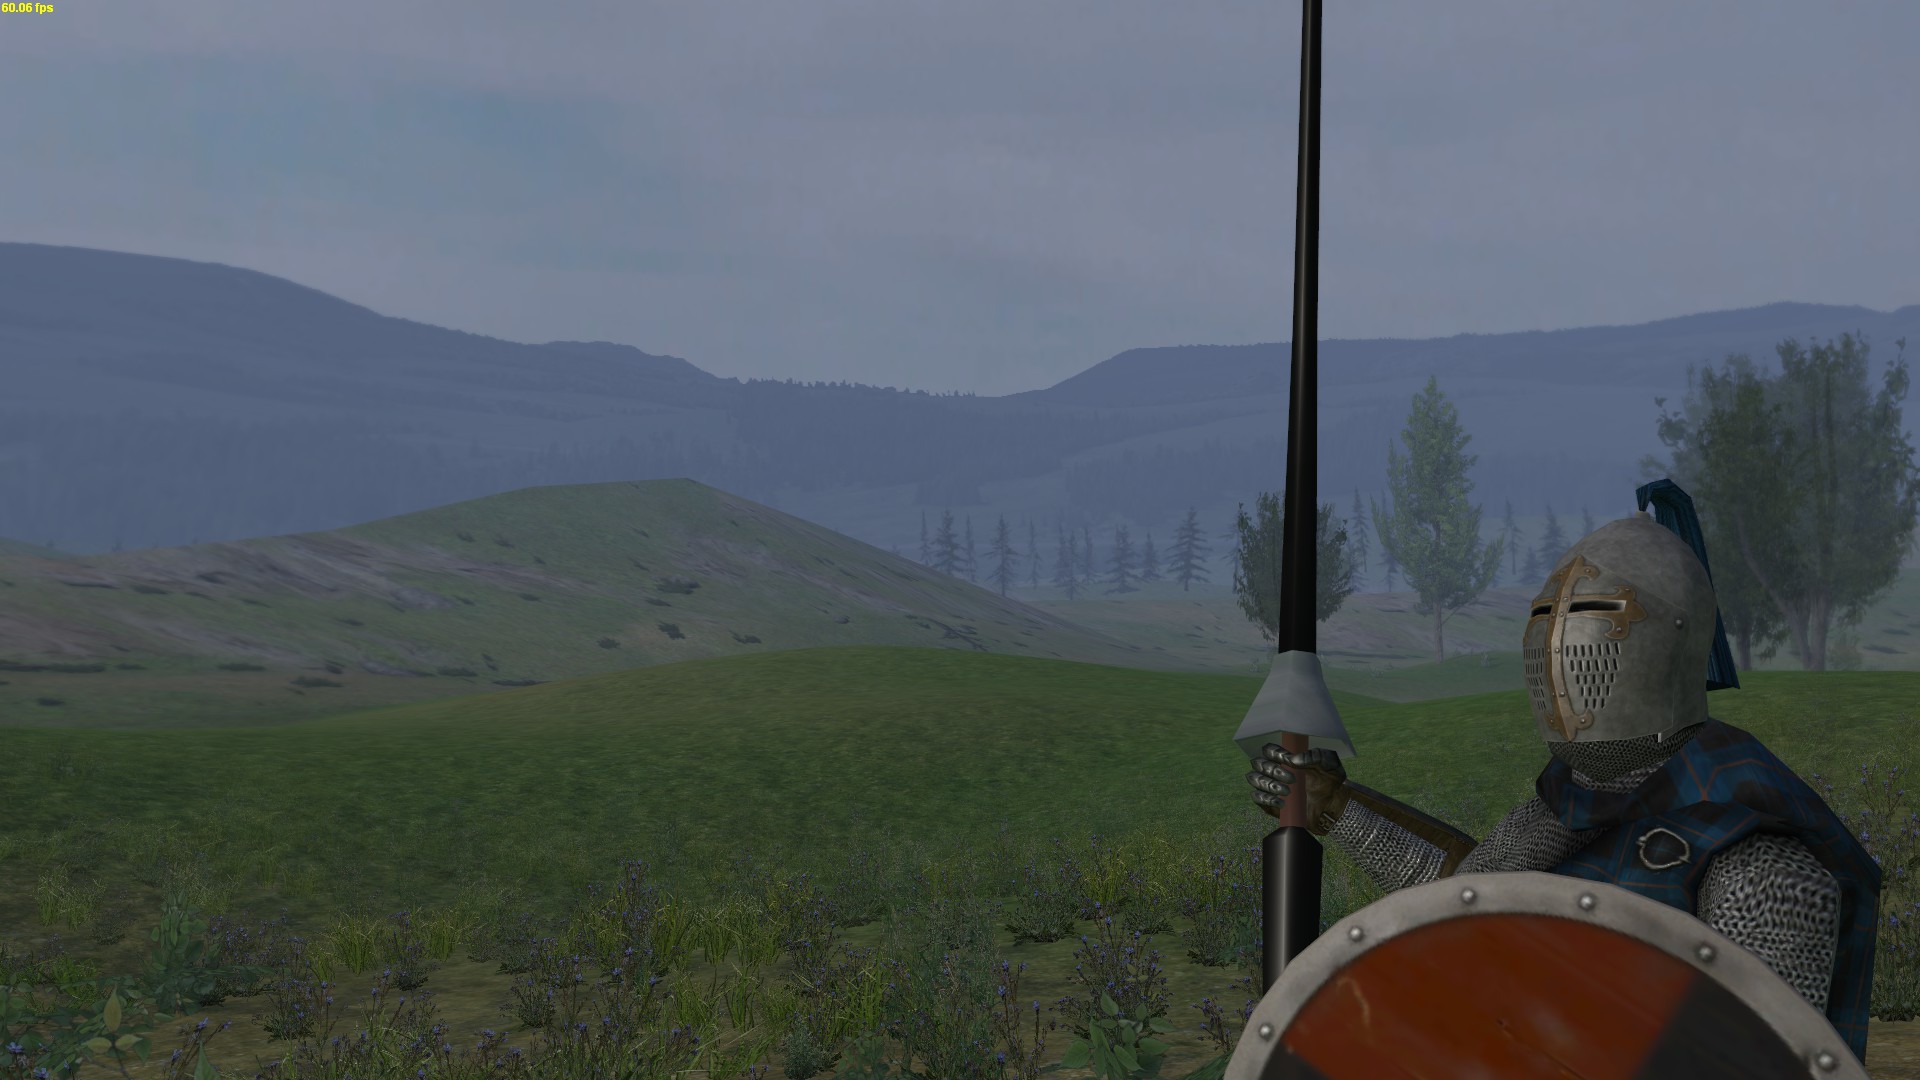 Warband prophesy of pendor 3.9 5. Mount and Blade Warband Prophesy of Pendor. Prophesy of Pendor Bannerlord. Prophesy of Pendor Равенстерн. Mount and Blade нолдоры.